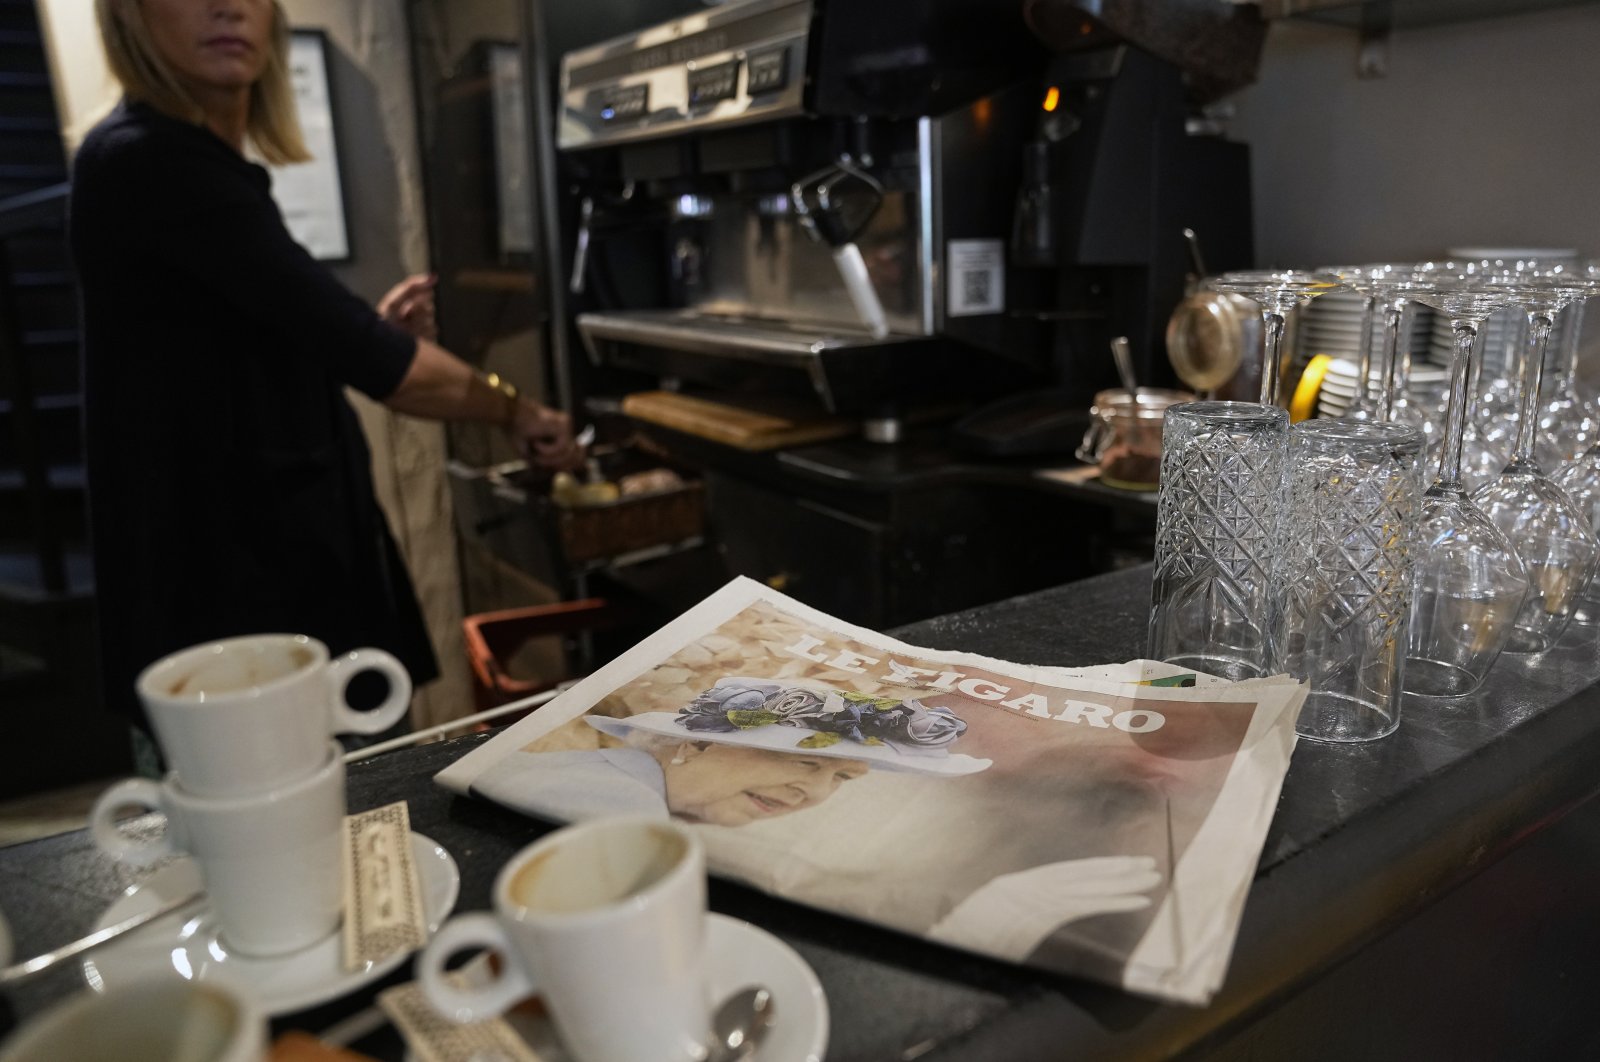 A newspaper&#039;s front page featuring a picture of Queen Elizabeth II following her death is seen near morning cups of coffee in a restaurant in Versailles, west of Paris, France, Sept. 9, 2022. (AP Photo)